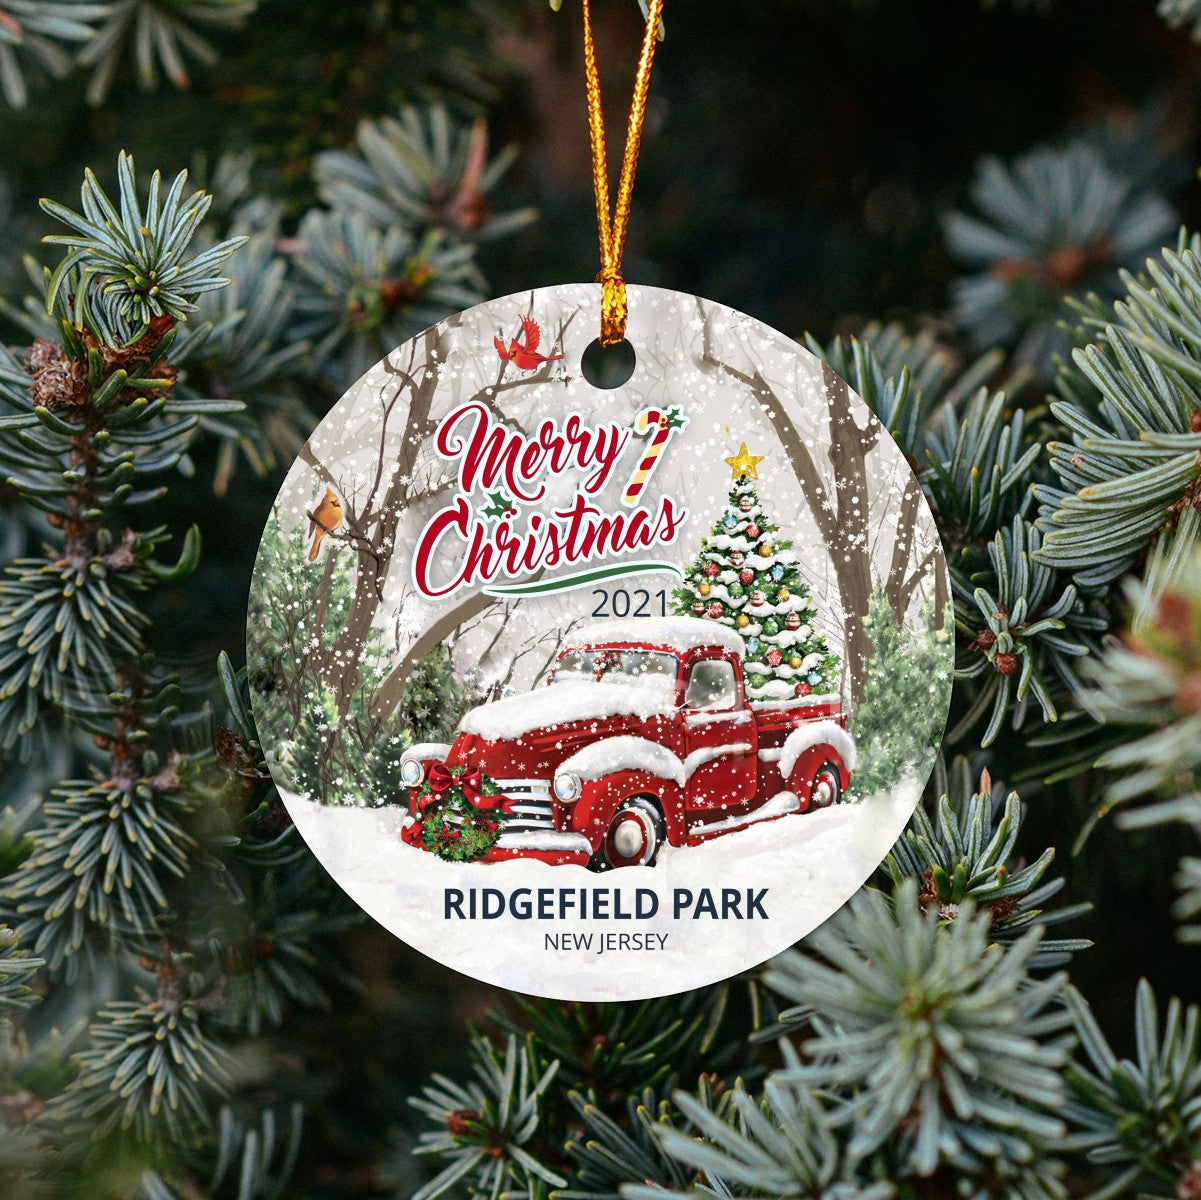 Christmas Tree Ornaments Ridgefield Park - Ornament With Name City, State Ridgefield Park New Jersey NJ Ornament - Red Truck Xmas Ornaments 3'' Plastic Gift For Family, Friend And Housewarming